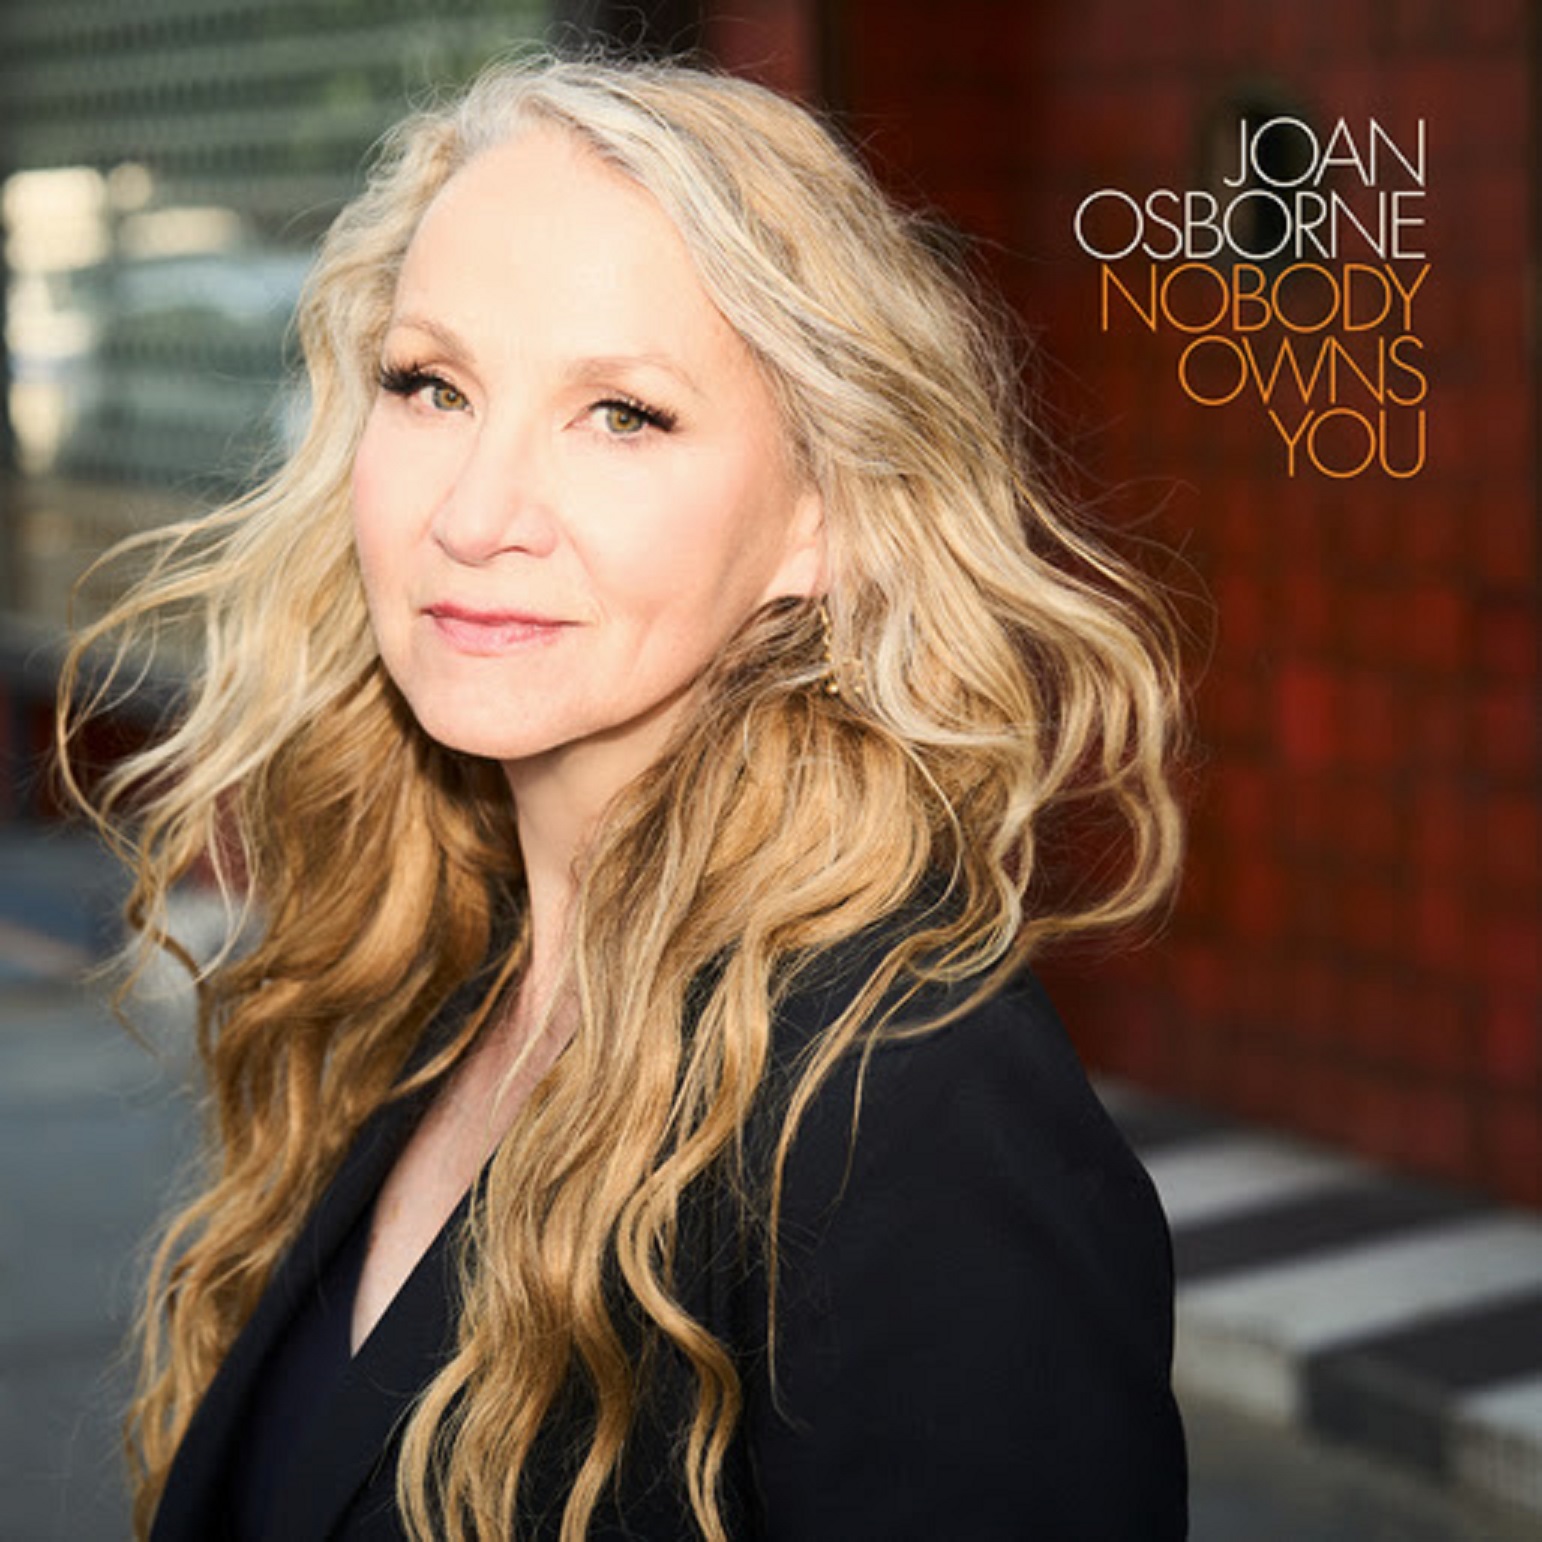 Joan Osborne Returns with NOBODY OWNS YOU, Her Most Personal Album To Date, Out September 8th